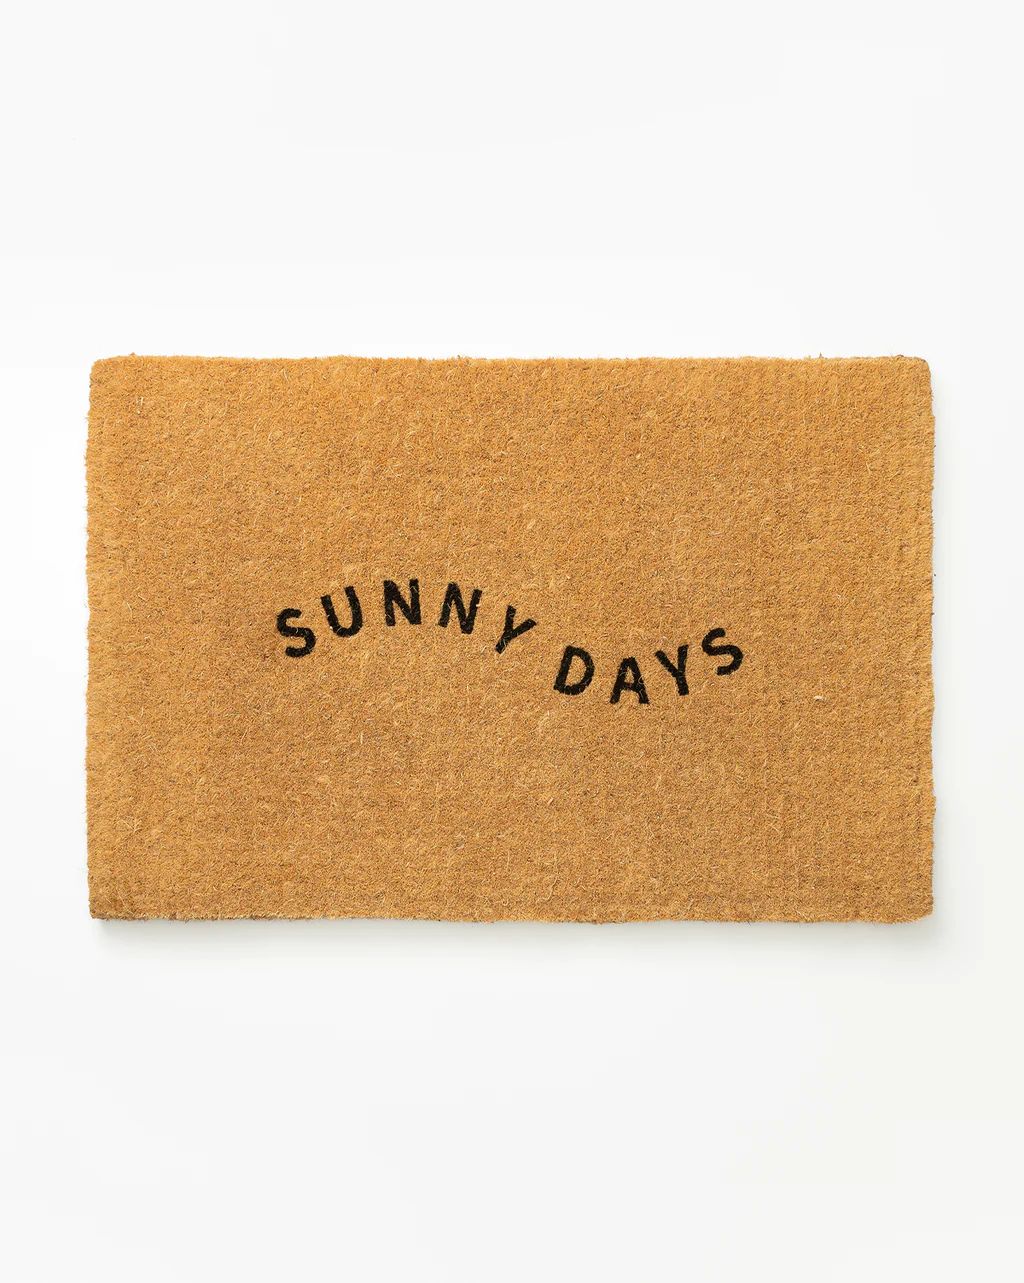 Sunny Days Doormat | McGee & Co. (US)